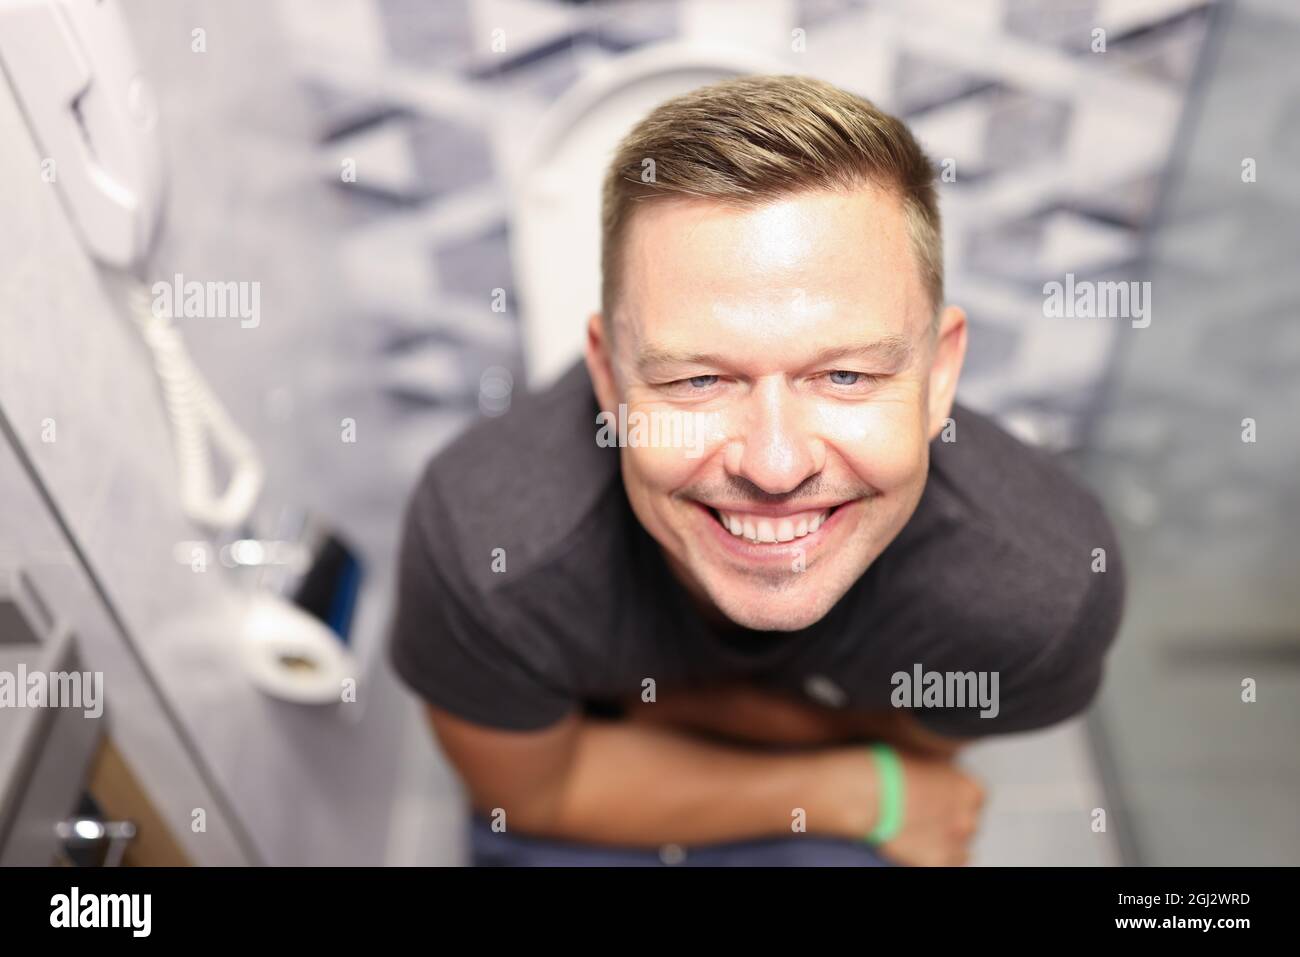 Portrait of young contented man sitting on toilet closeup Stock Photo